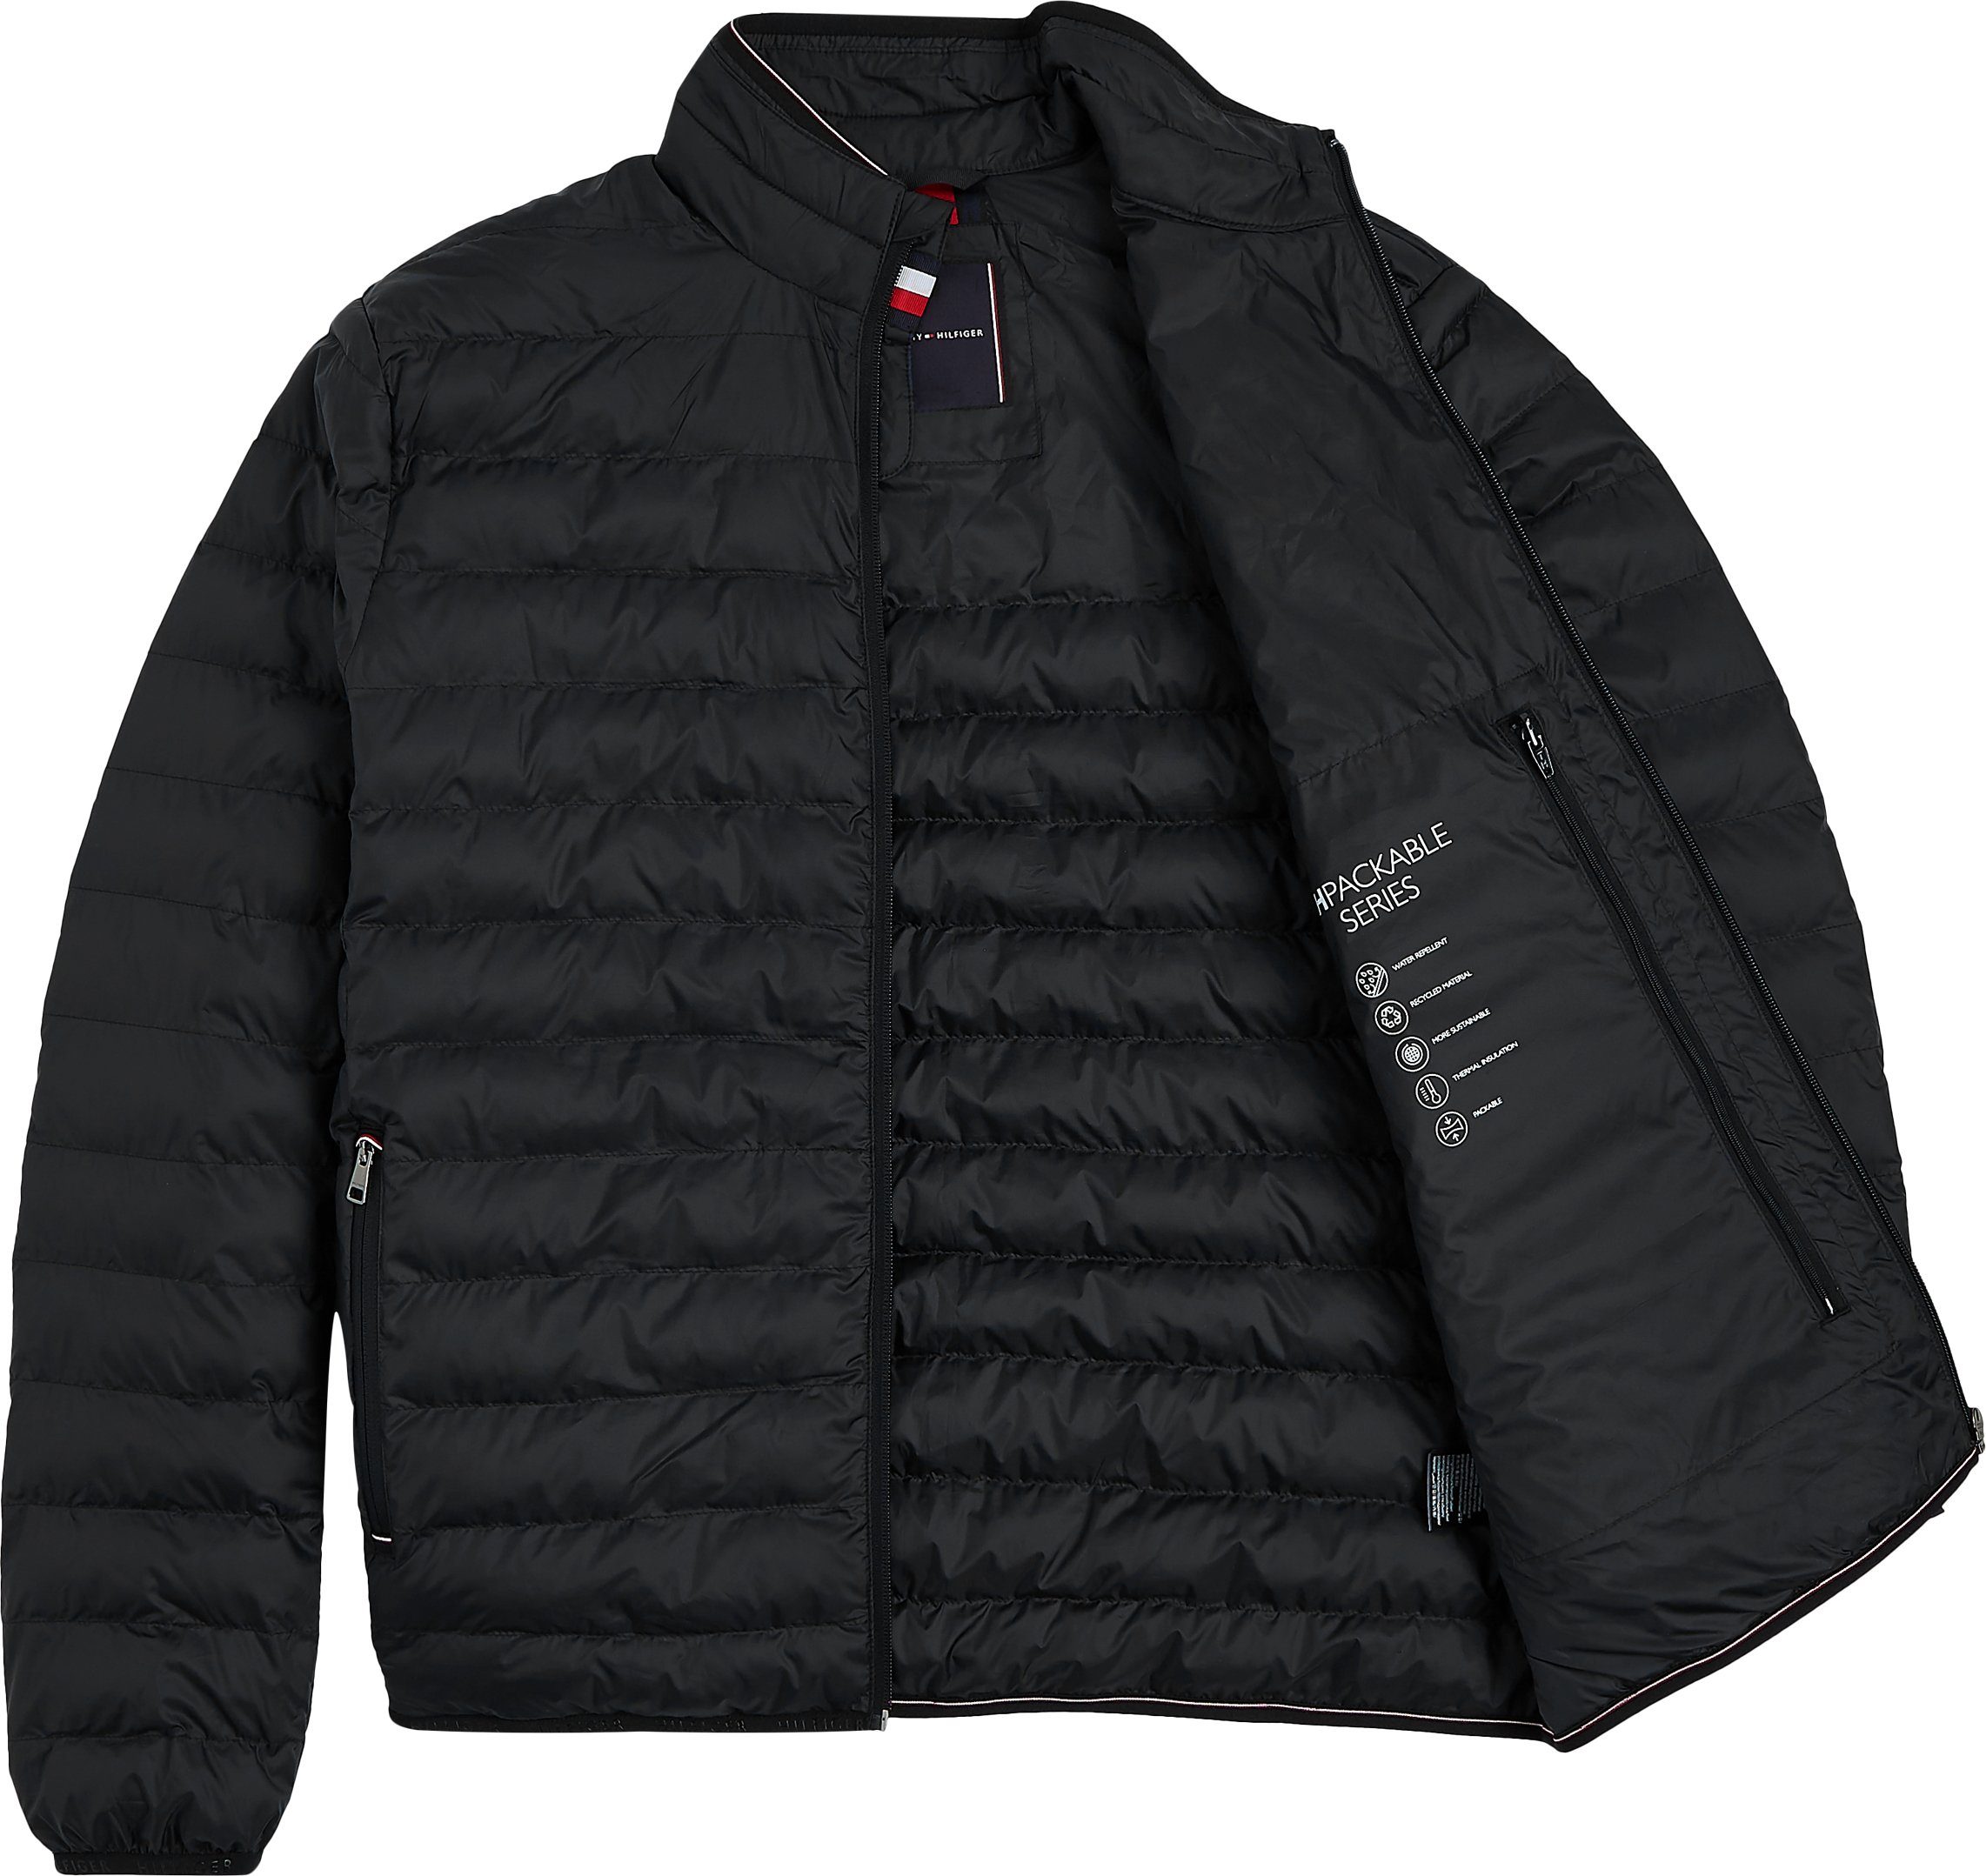 Tommy Hilfiger Steppjacke CORE PACKABLE black JACKET RECYCLED